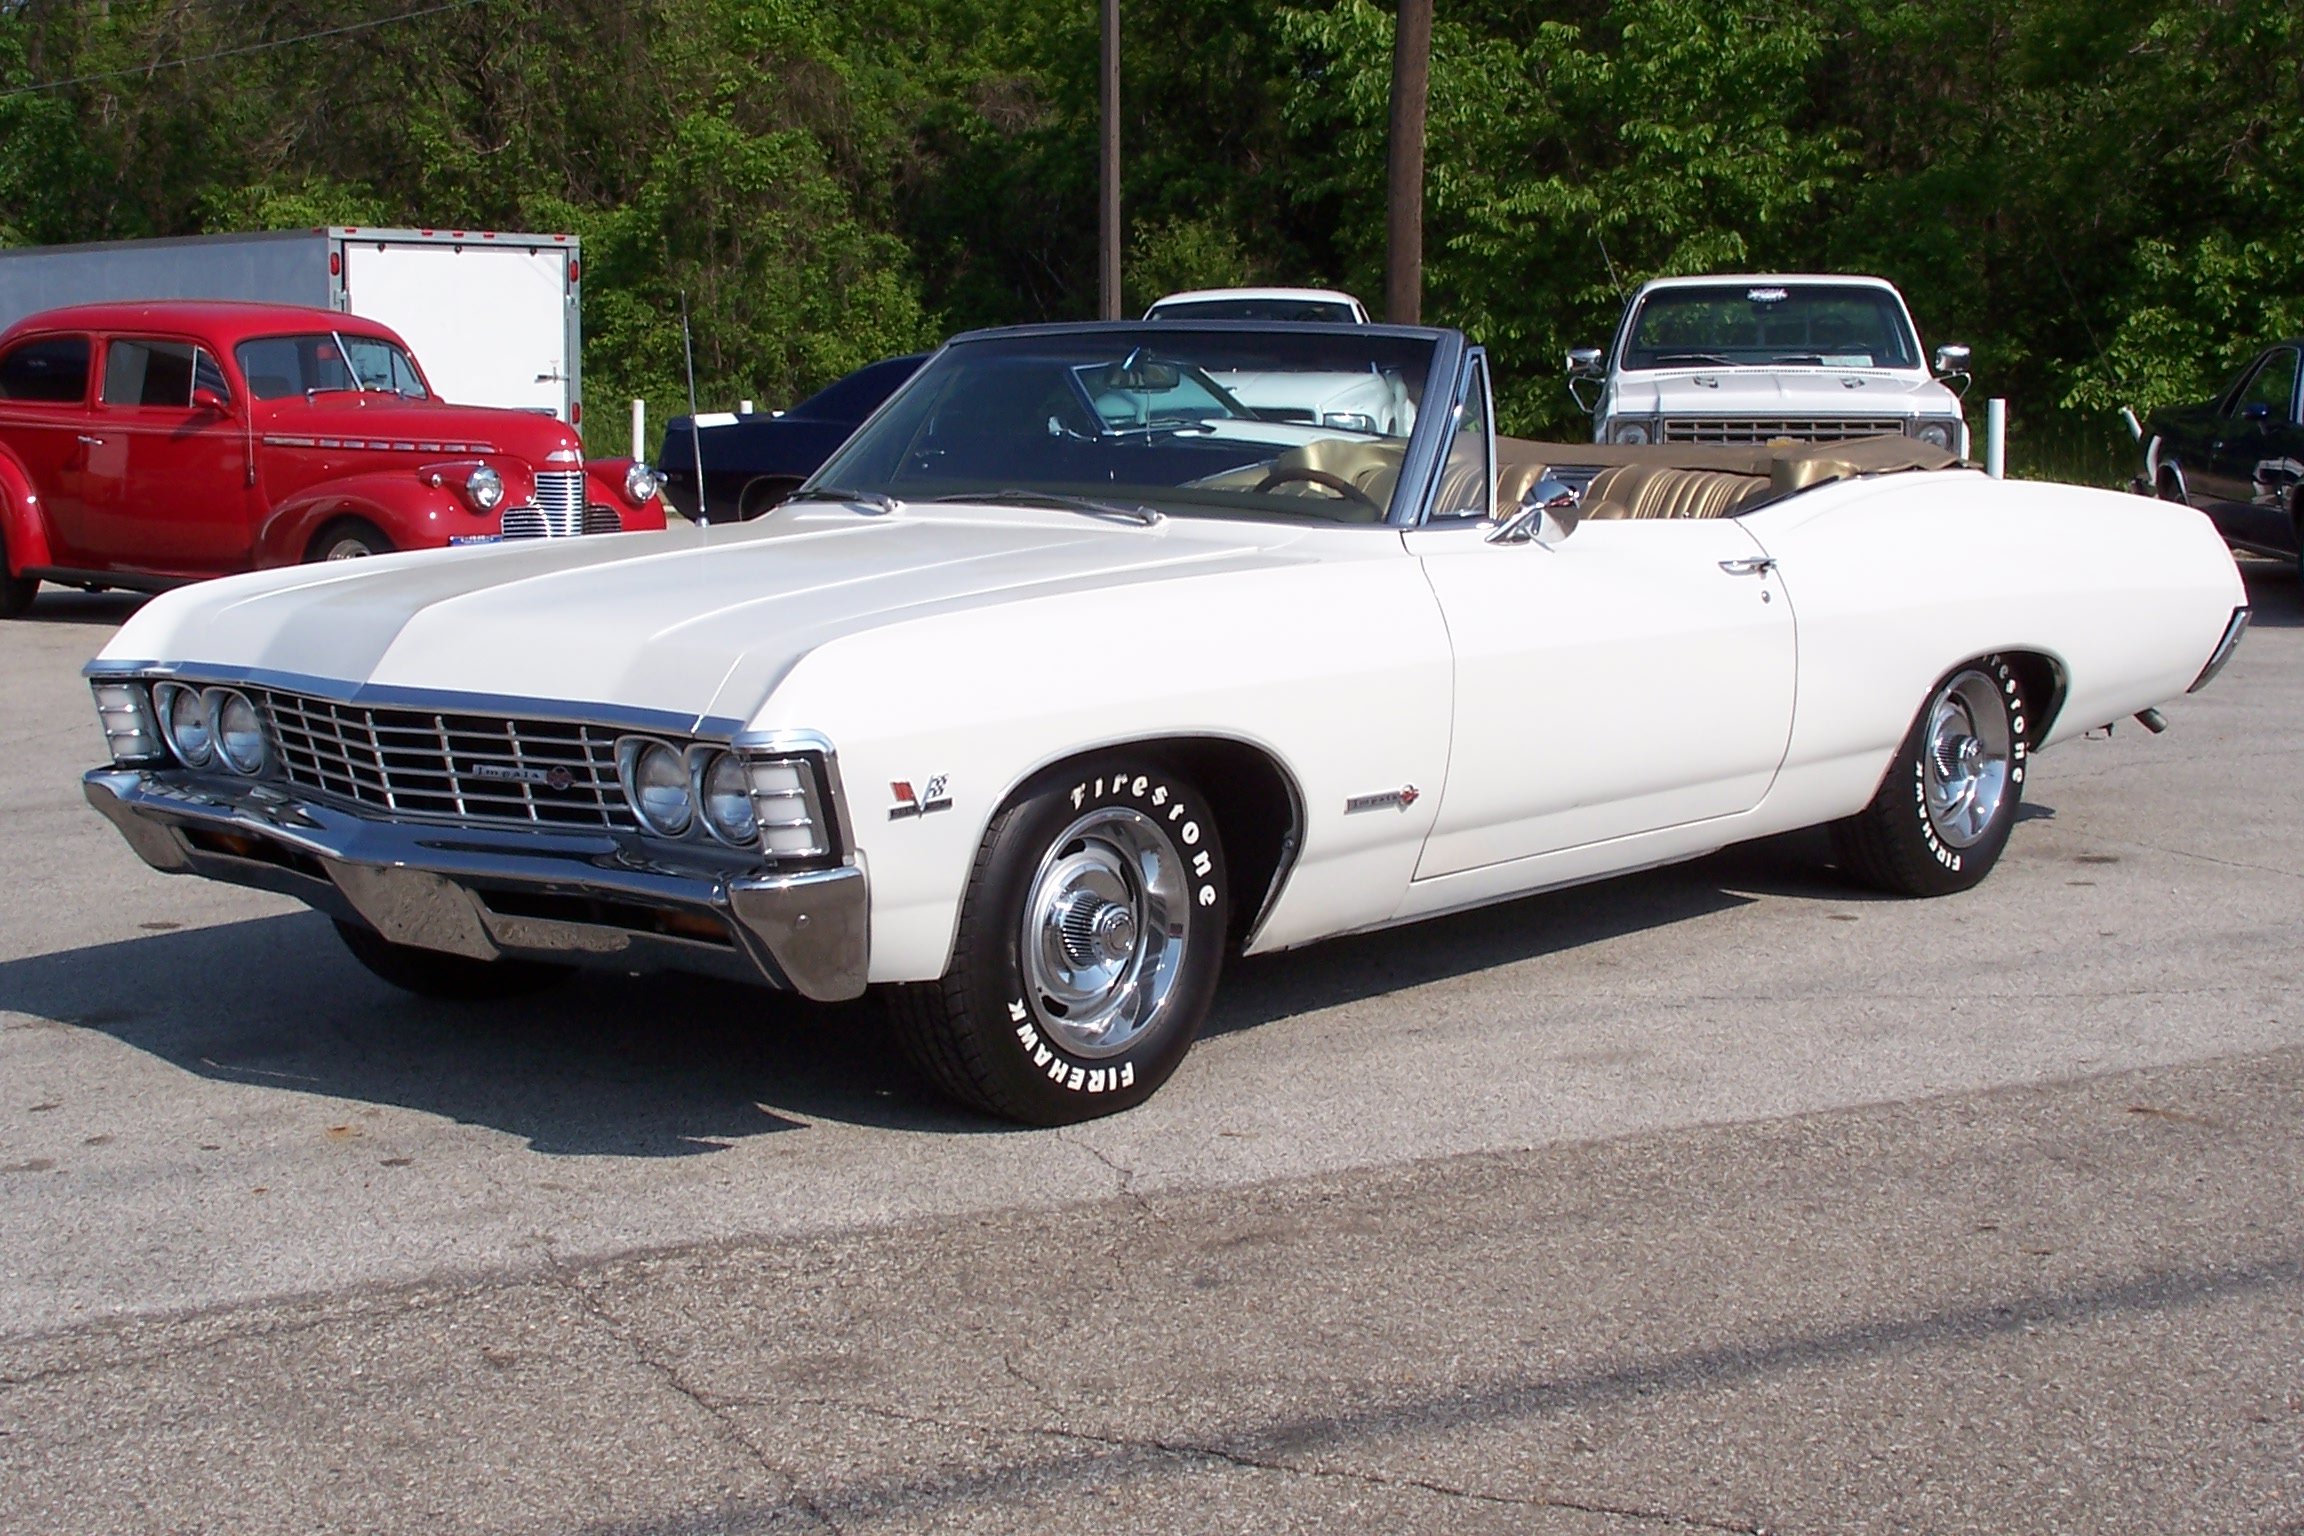 1967, Chevrolet, Impala, Ss, Convertible, Muscle, Classic, S s Wallpaper